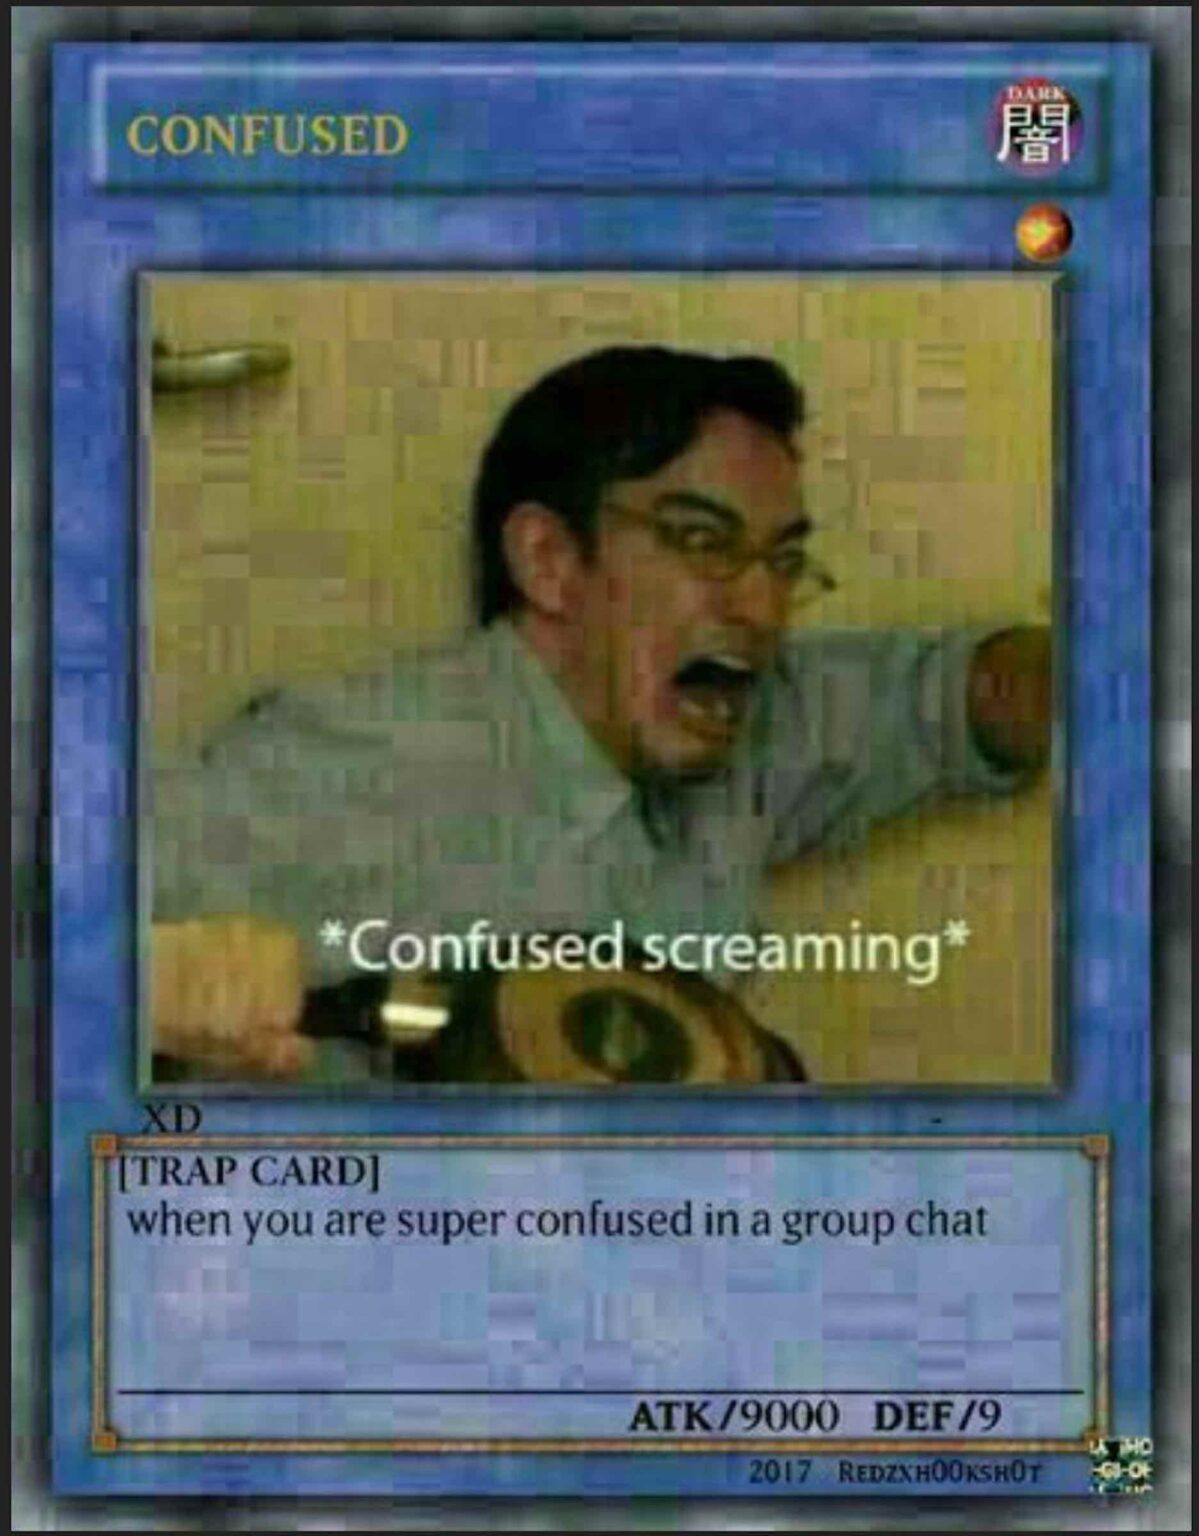 It’s time to d-d-d-d-d-duel! Break out your old card collection and dive into these Yu-Gi-Oh card memes! 